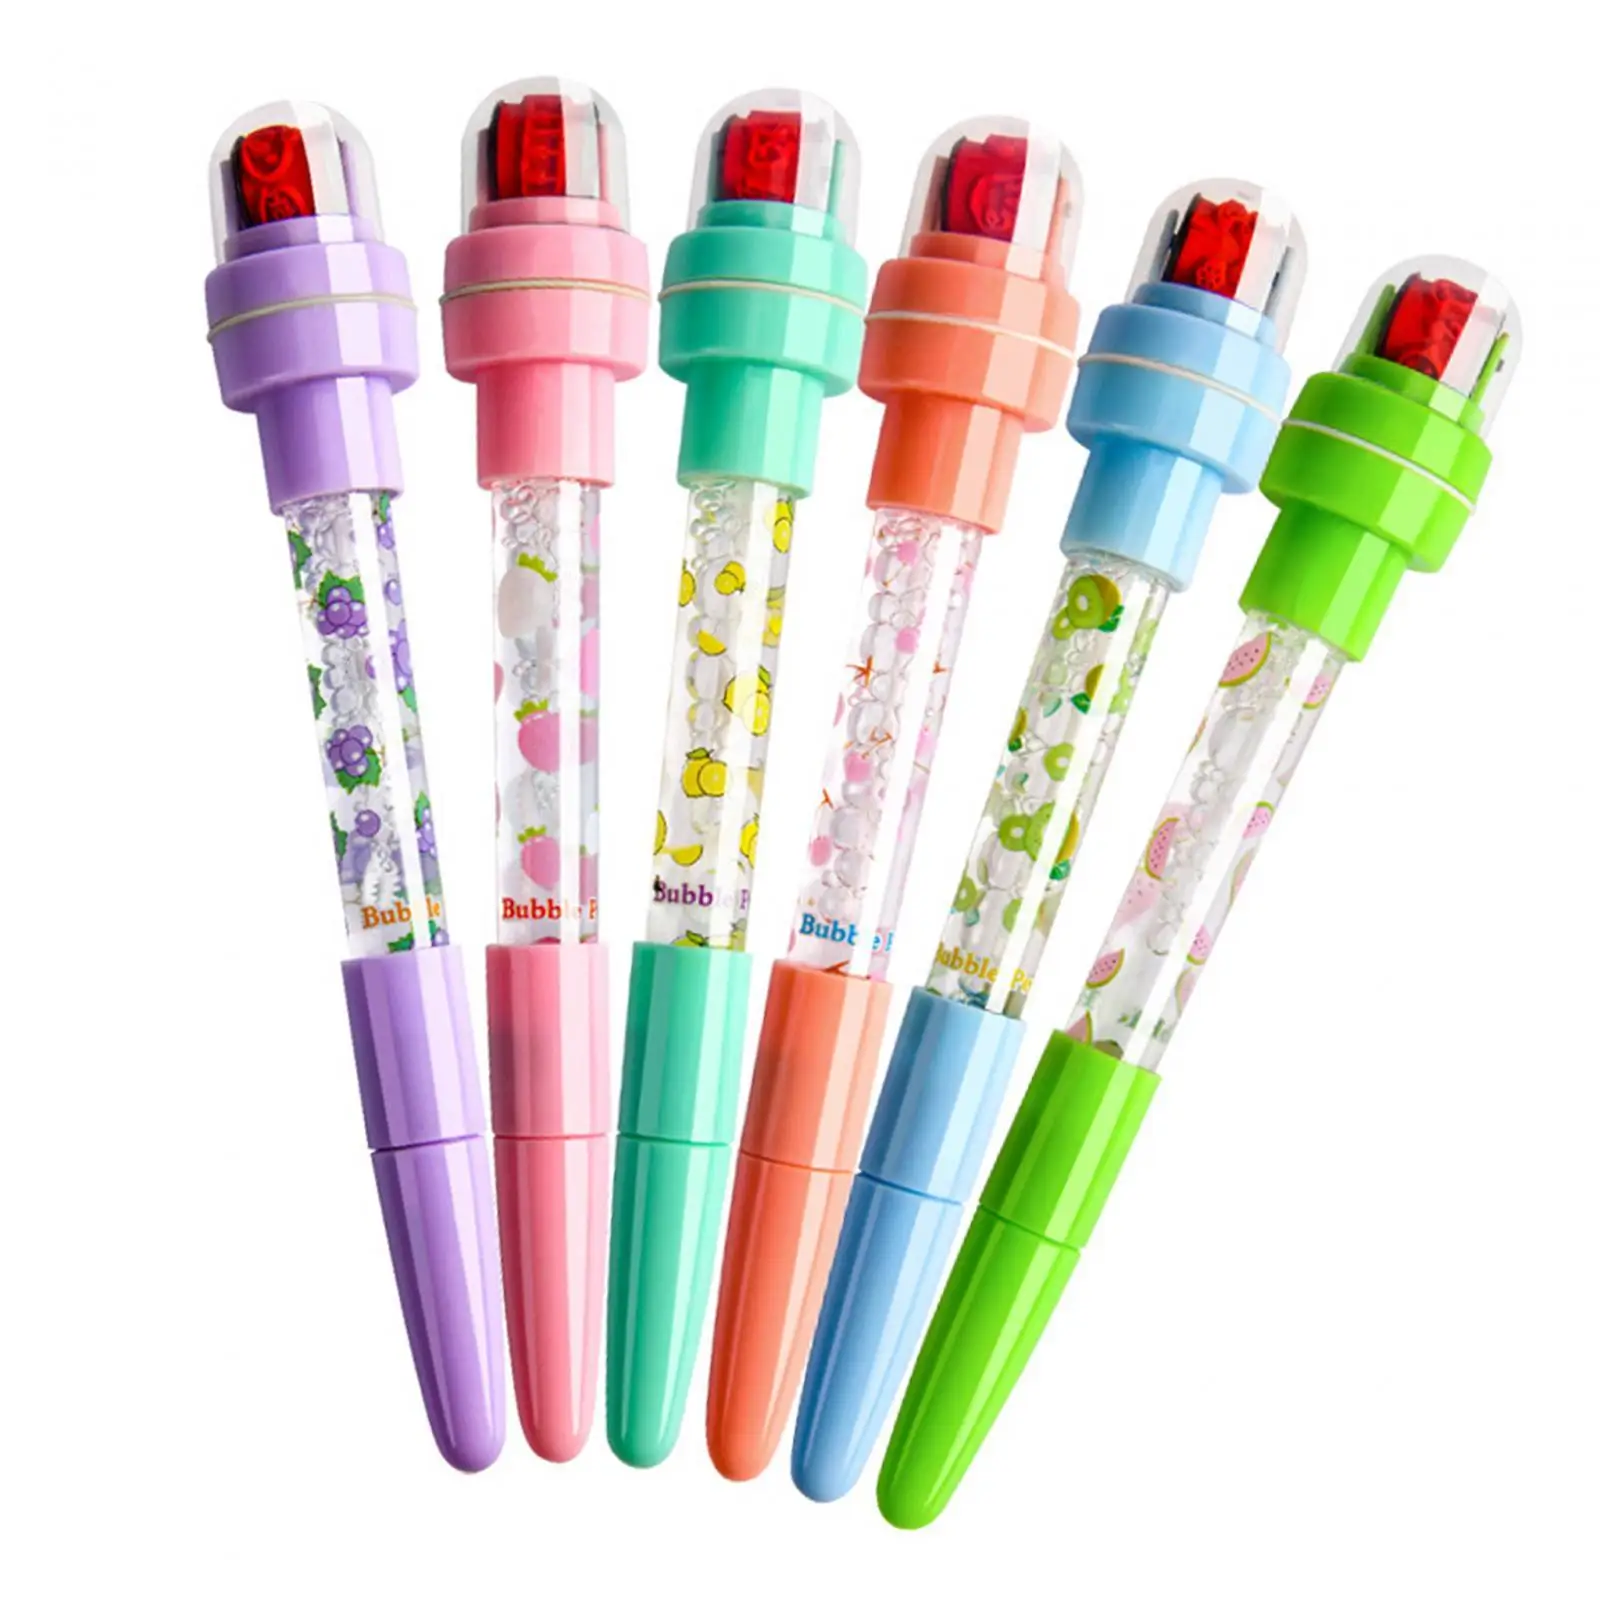 6x Ballpoint Pen 0.7mm Durable Supplies Multifunctional DIY Portable Stamp Toy Pens for Office Writing Classroom Draw Exam Spare